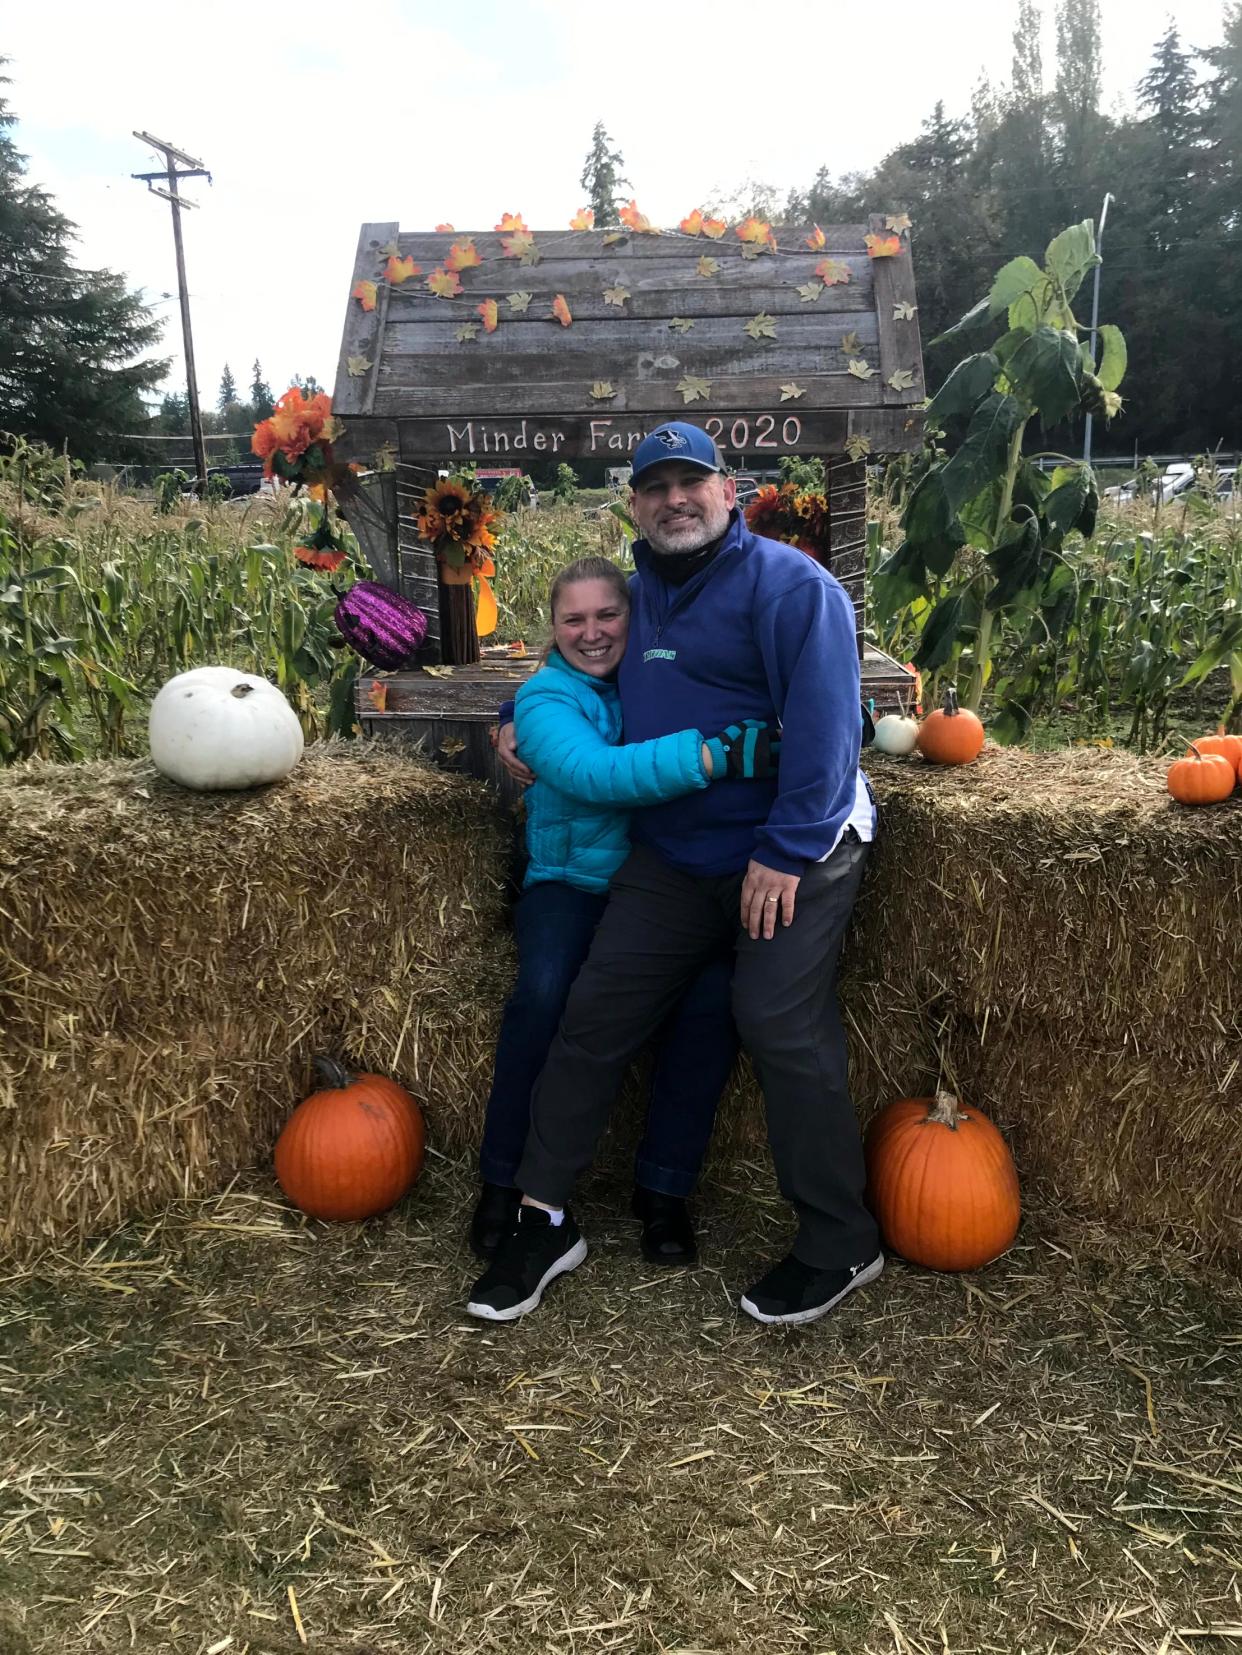 Monica and Clay Blackwood at the Minder Farms pumpkin patch. The couple described their careers as a collaboration, with Clay Blackwood having spent decades coaching youth sports around Kitsap, and Monica running West Sound Work Force.